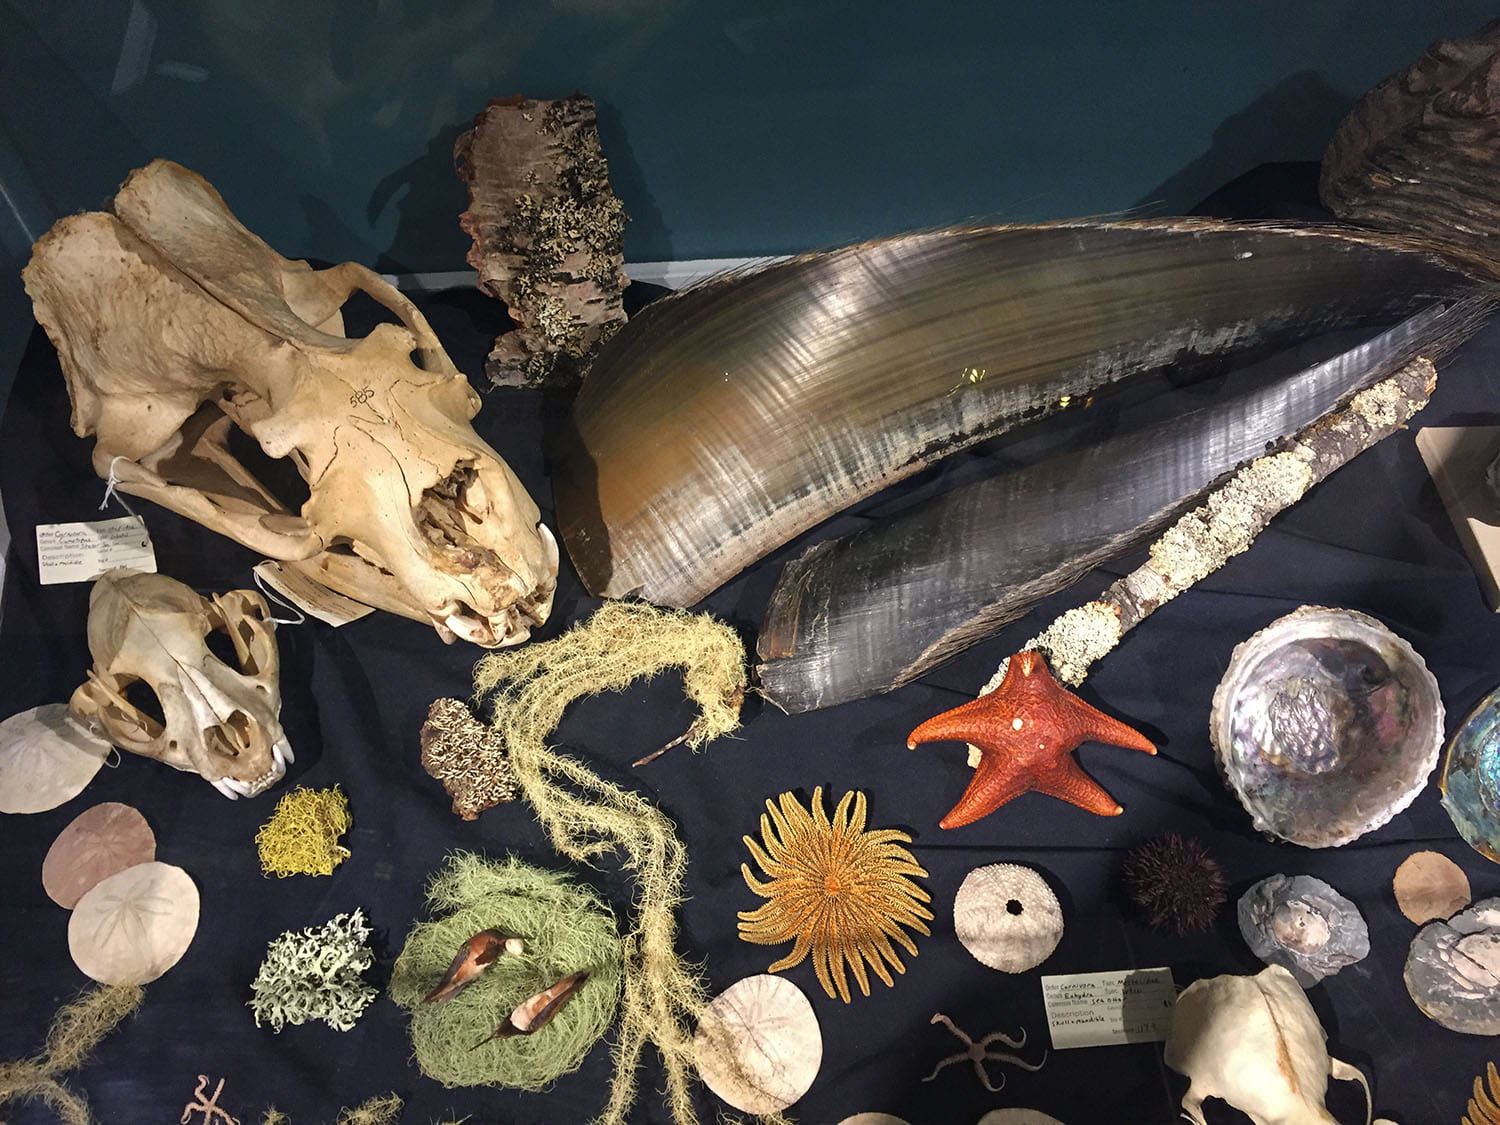 variety of sea life in a display case: animal skulls, sand dollars, lichen, anemone, starfish, sea urchin, and oyster shells